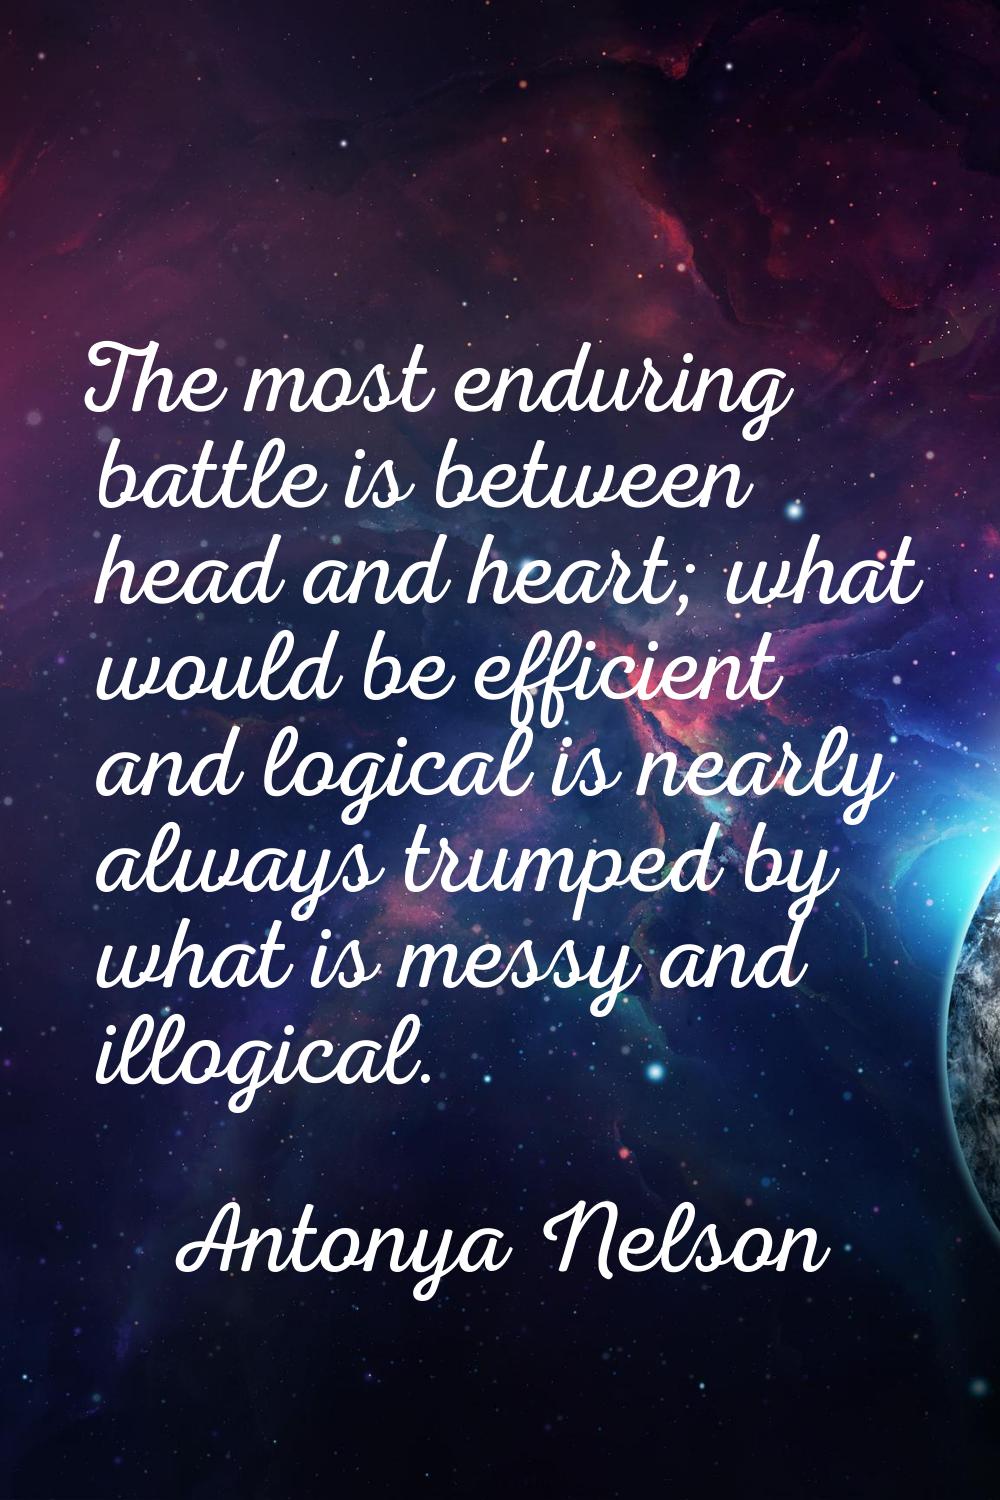 The most enduring battle is between head and heart; what would be efficient and logical is nearly a